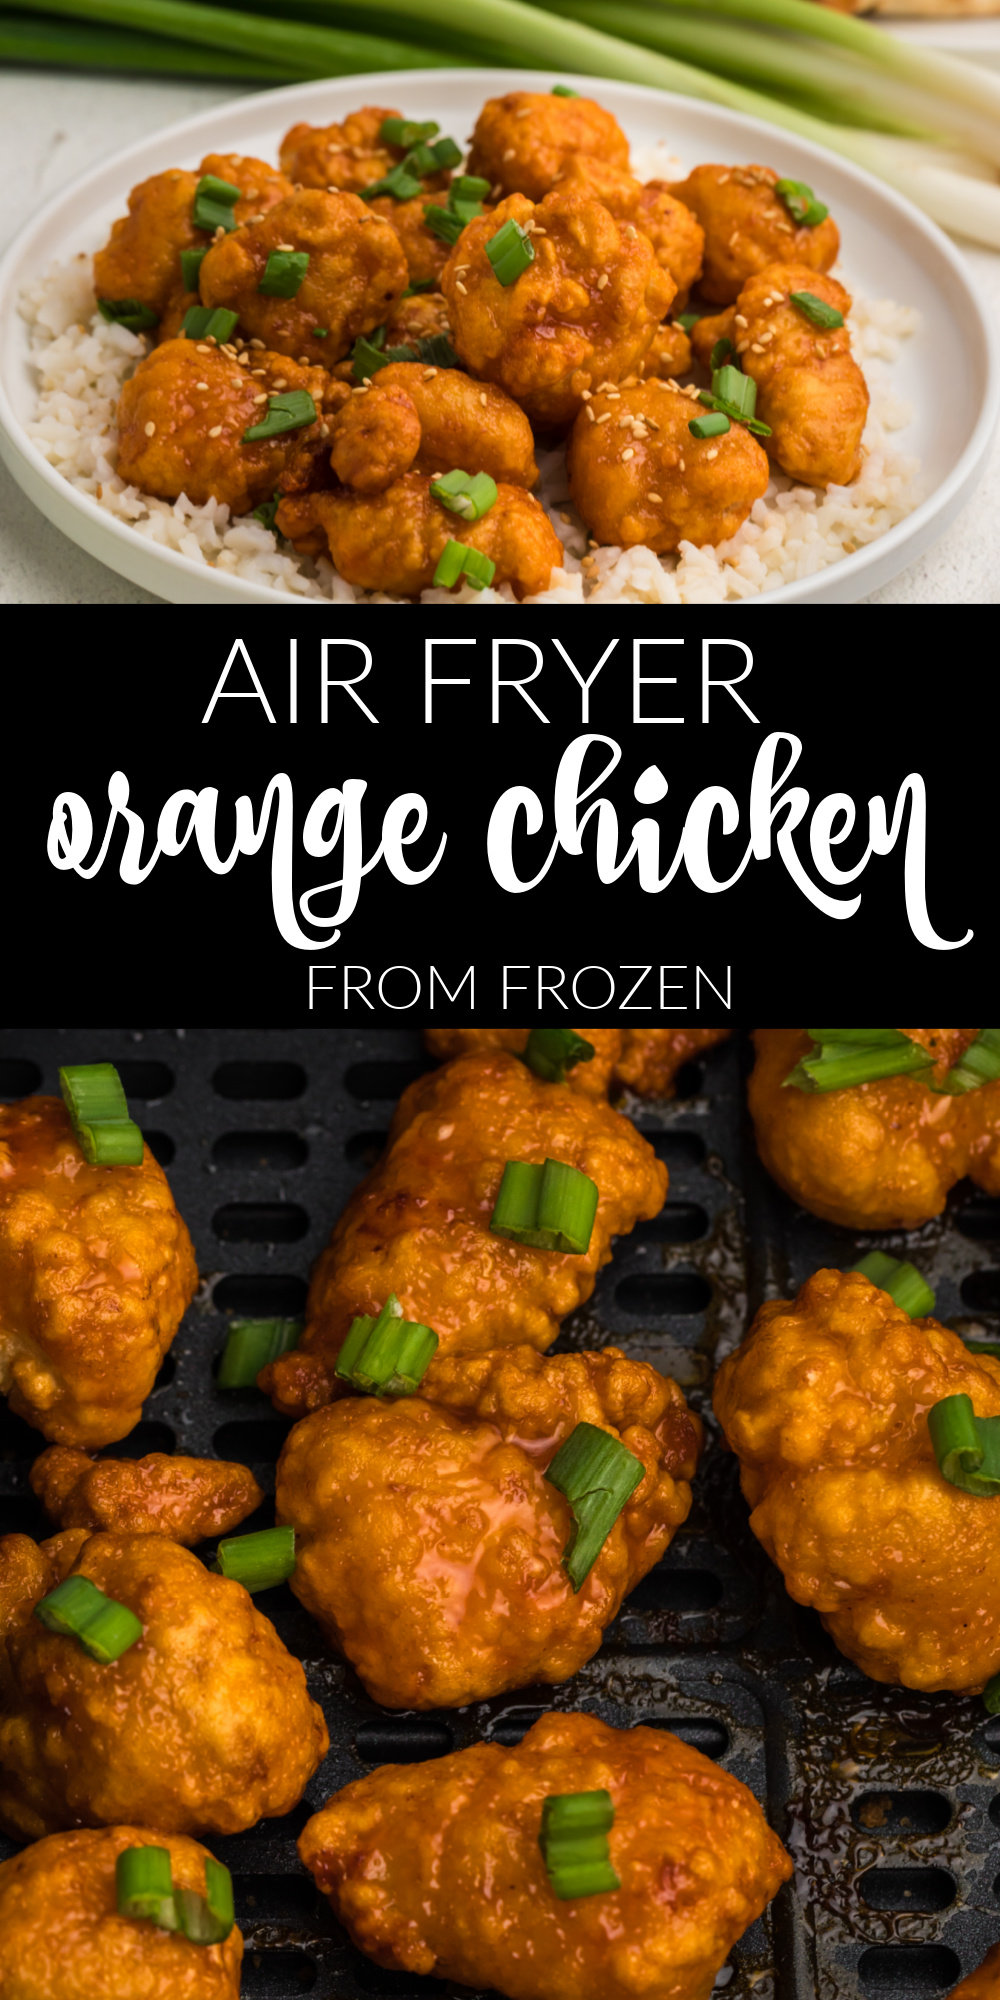 Air fryer frozen orange chicken perfect for weeknights just dump a bag of Innovasian orange chicken or your fav brand and it’s ready in no time! An easy air fryer recipe the whole family will enjoy!